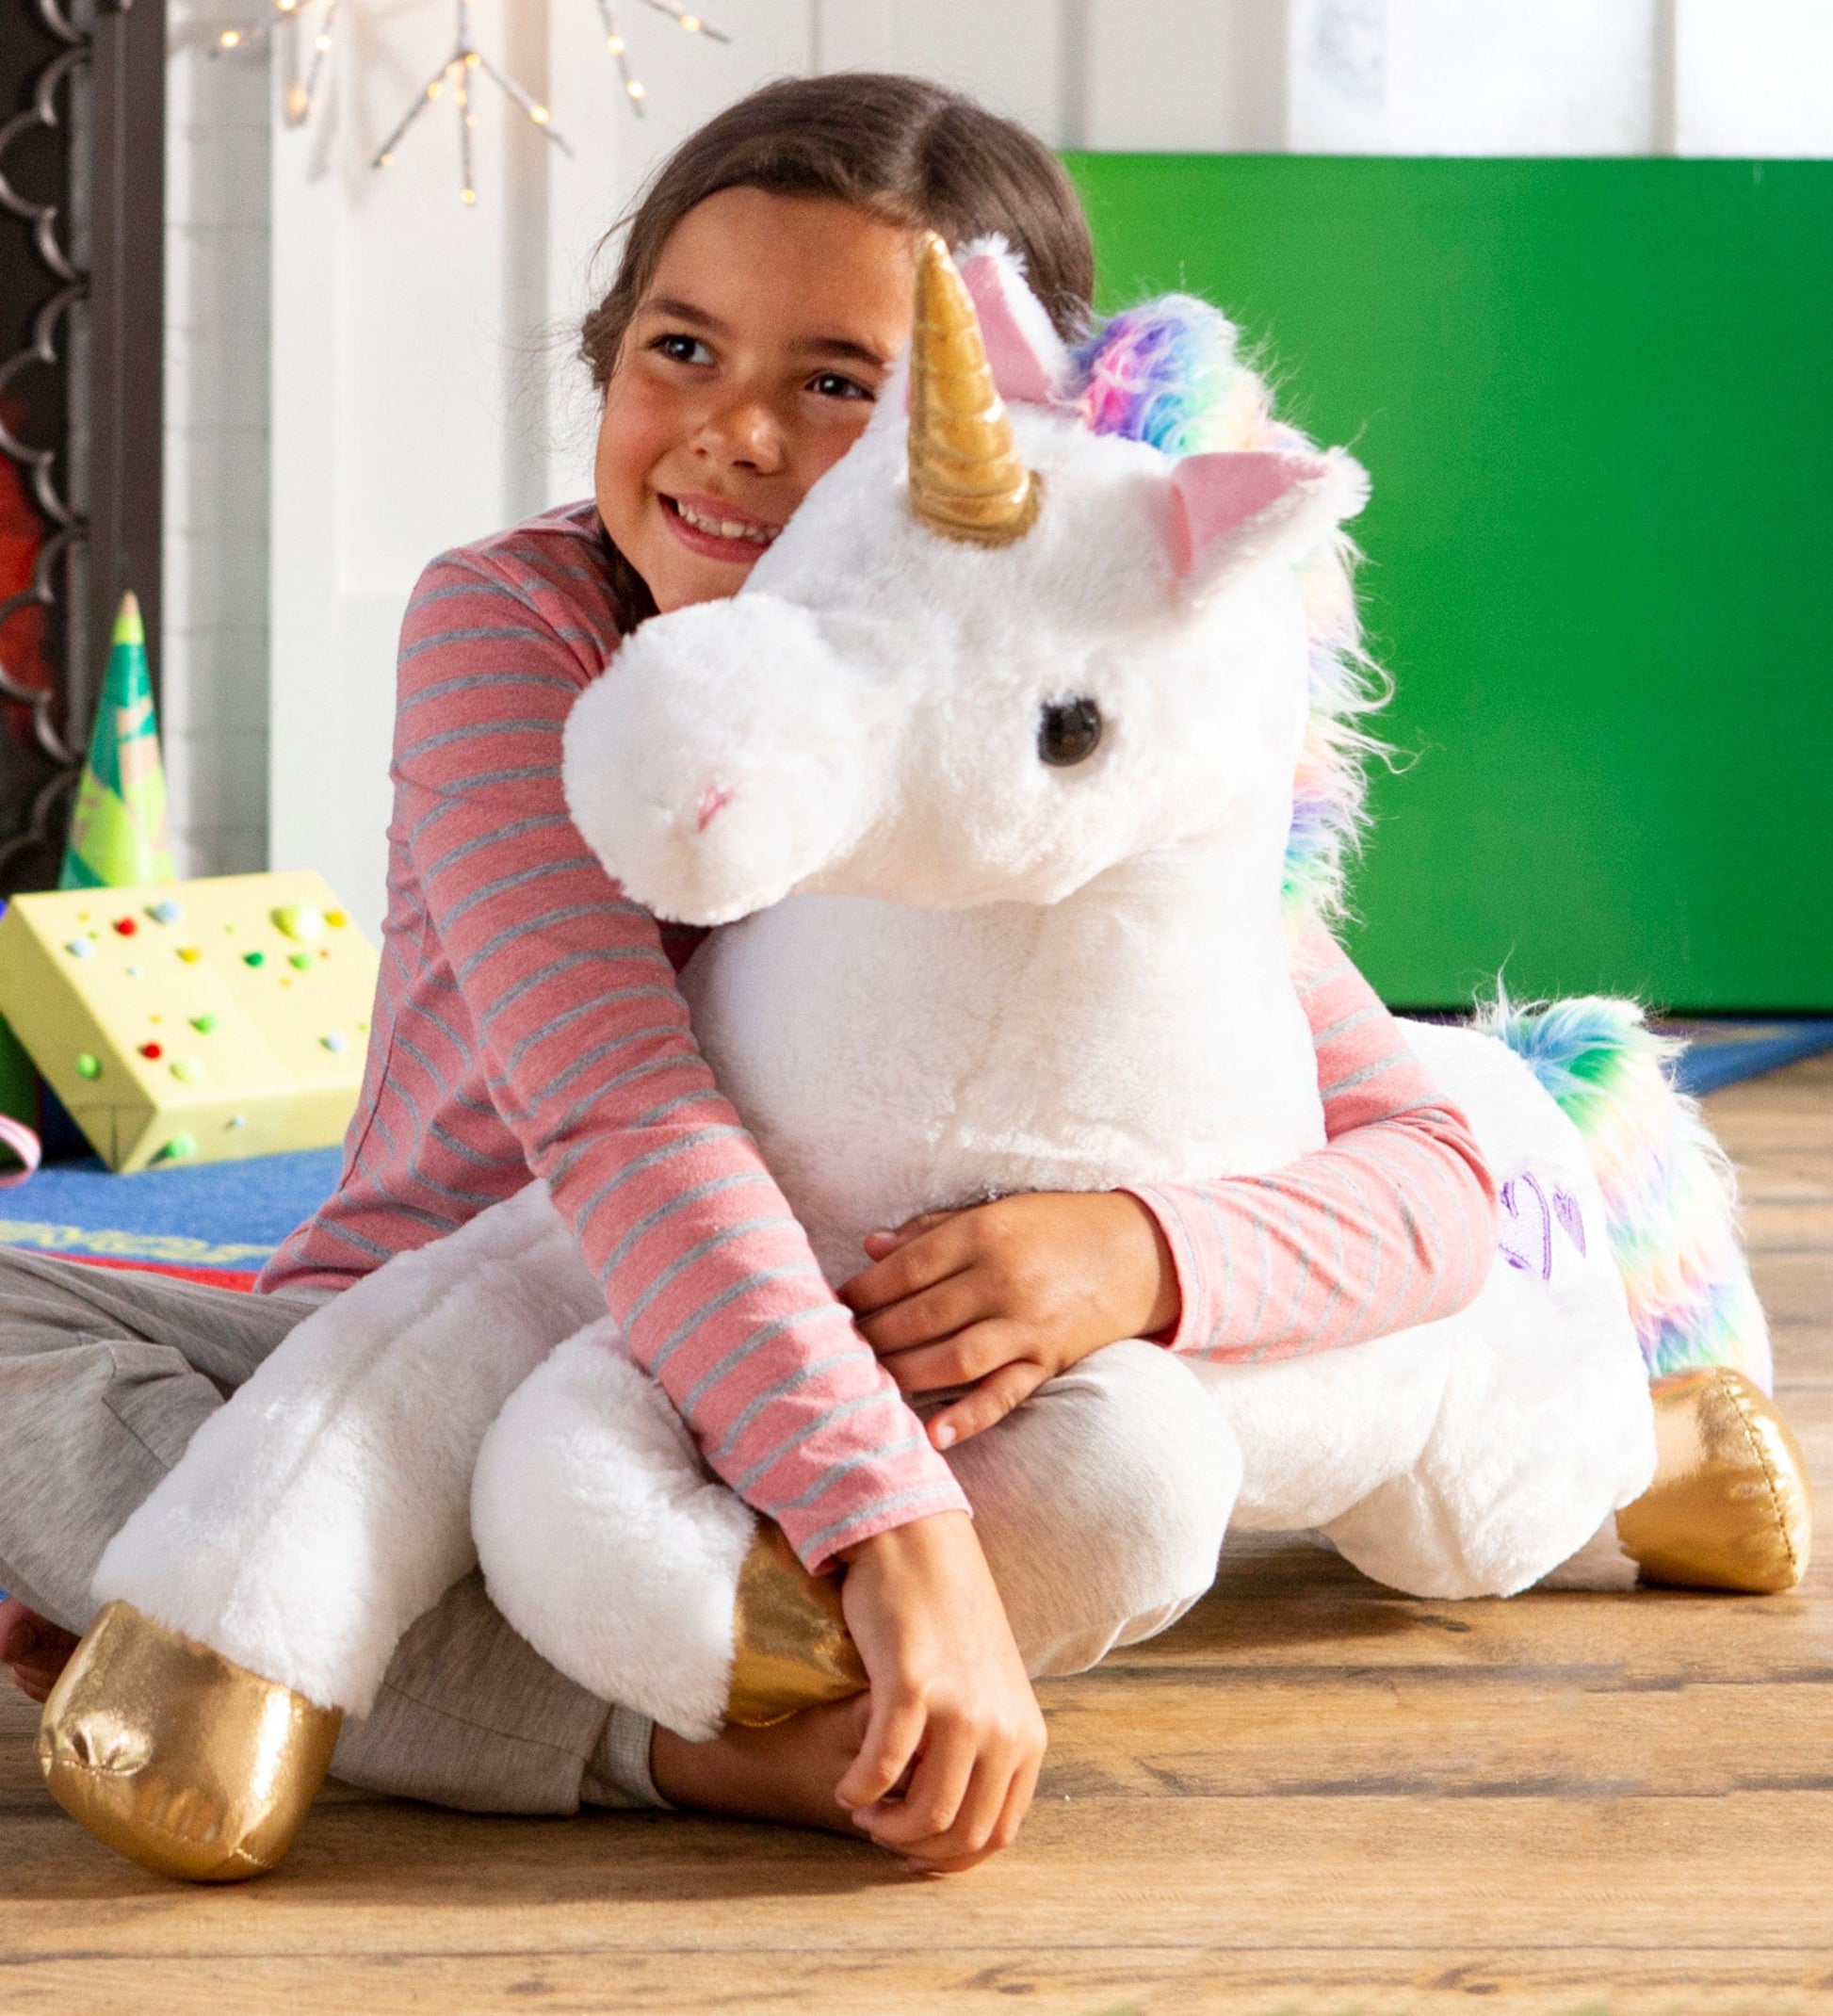 unicorn plush toys for girls and boys over 3 years old, one giant